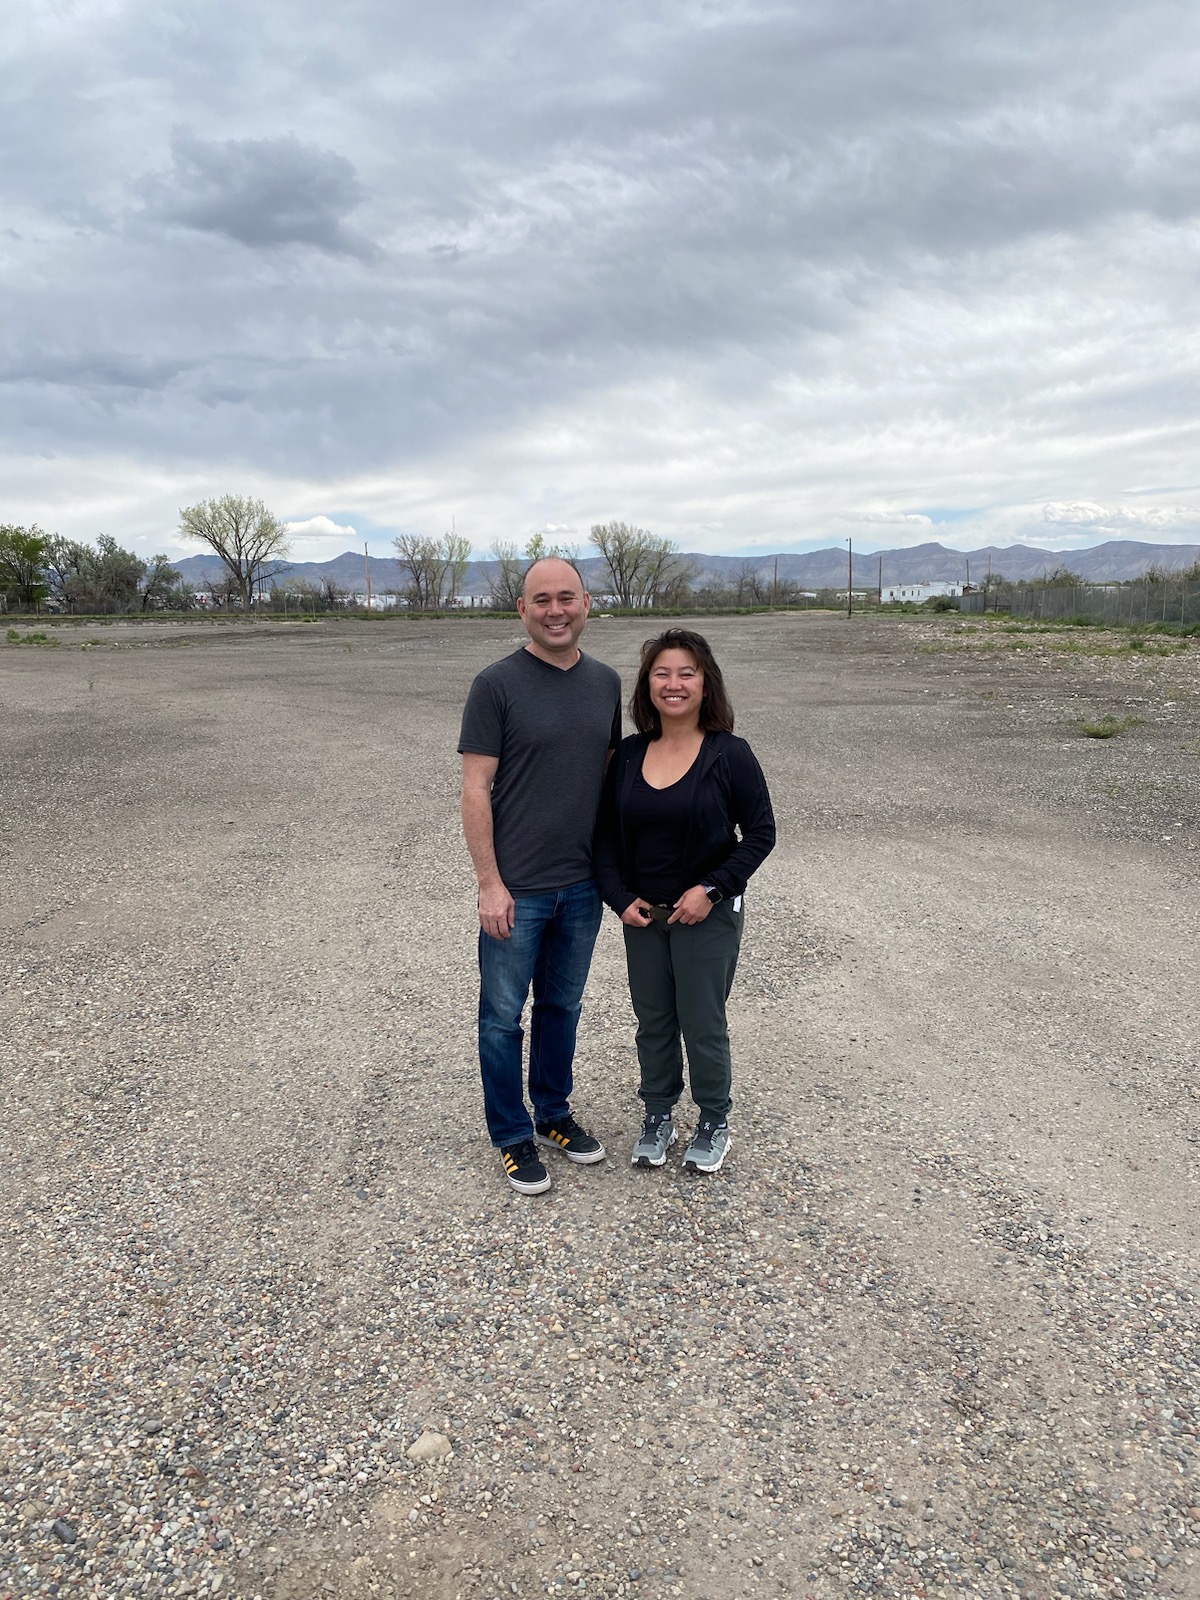 Self-Storage Investing Congratulates Mike and Jenny Terada on Their Successful Self-Storage Investment Journey